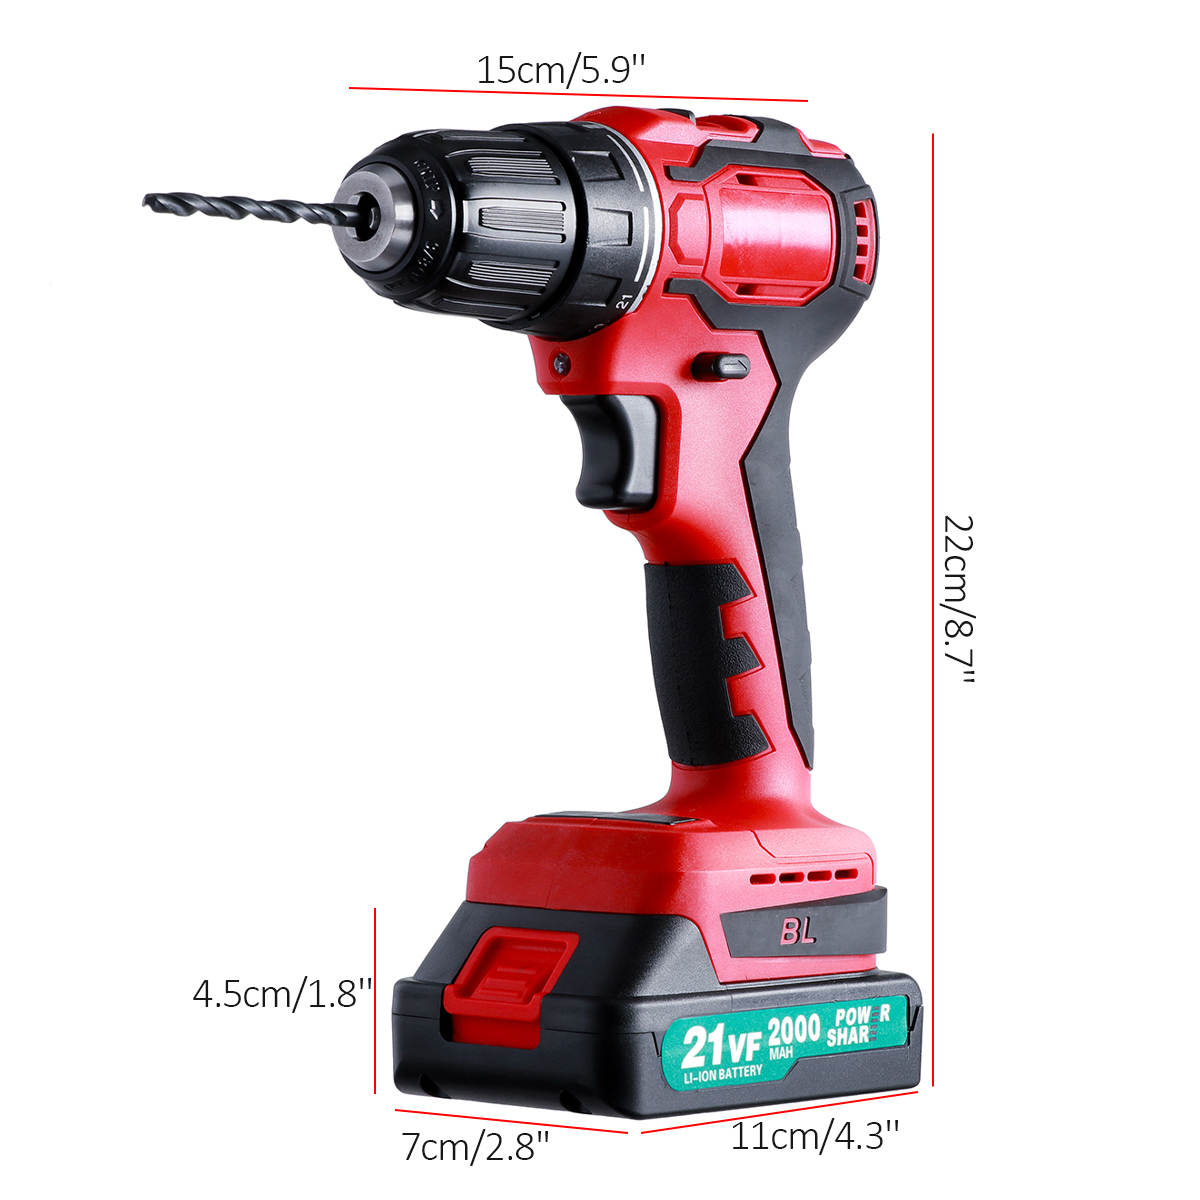 2000mAh-211NM-LED-Cordless-Electric-Drill-2-Speeds-Impact-Drill-W-None1pc2pcs-Battery-1785619-11